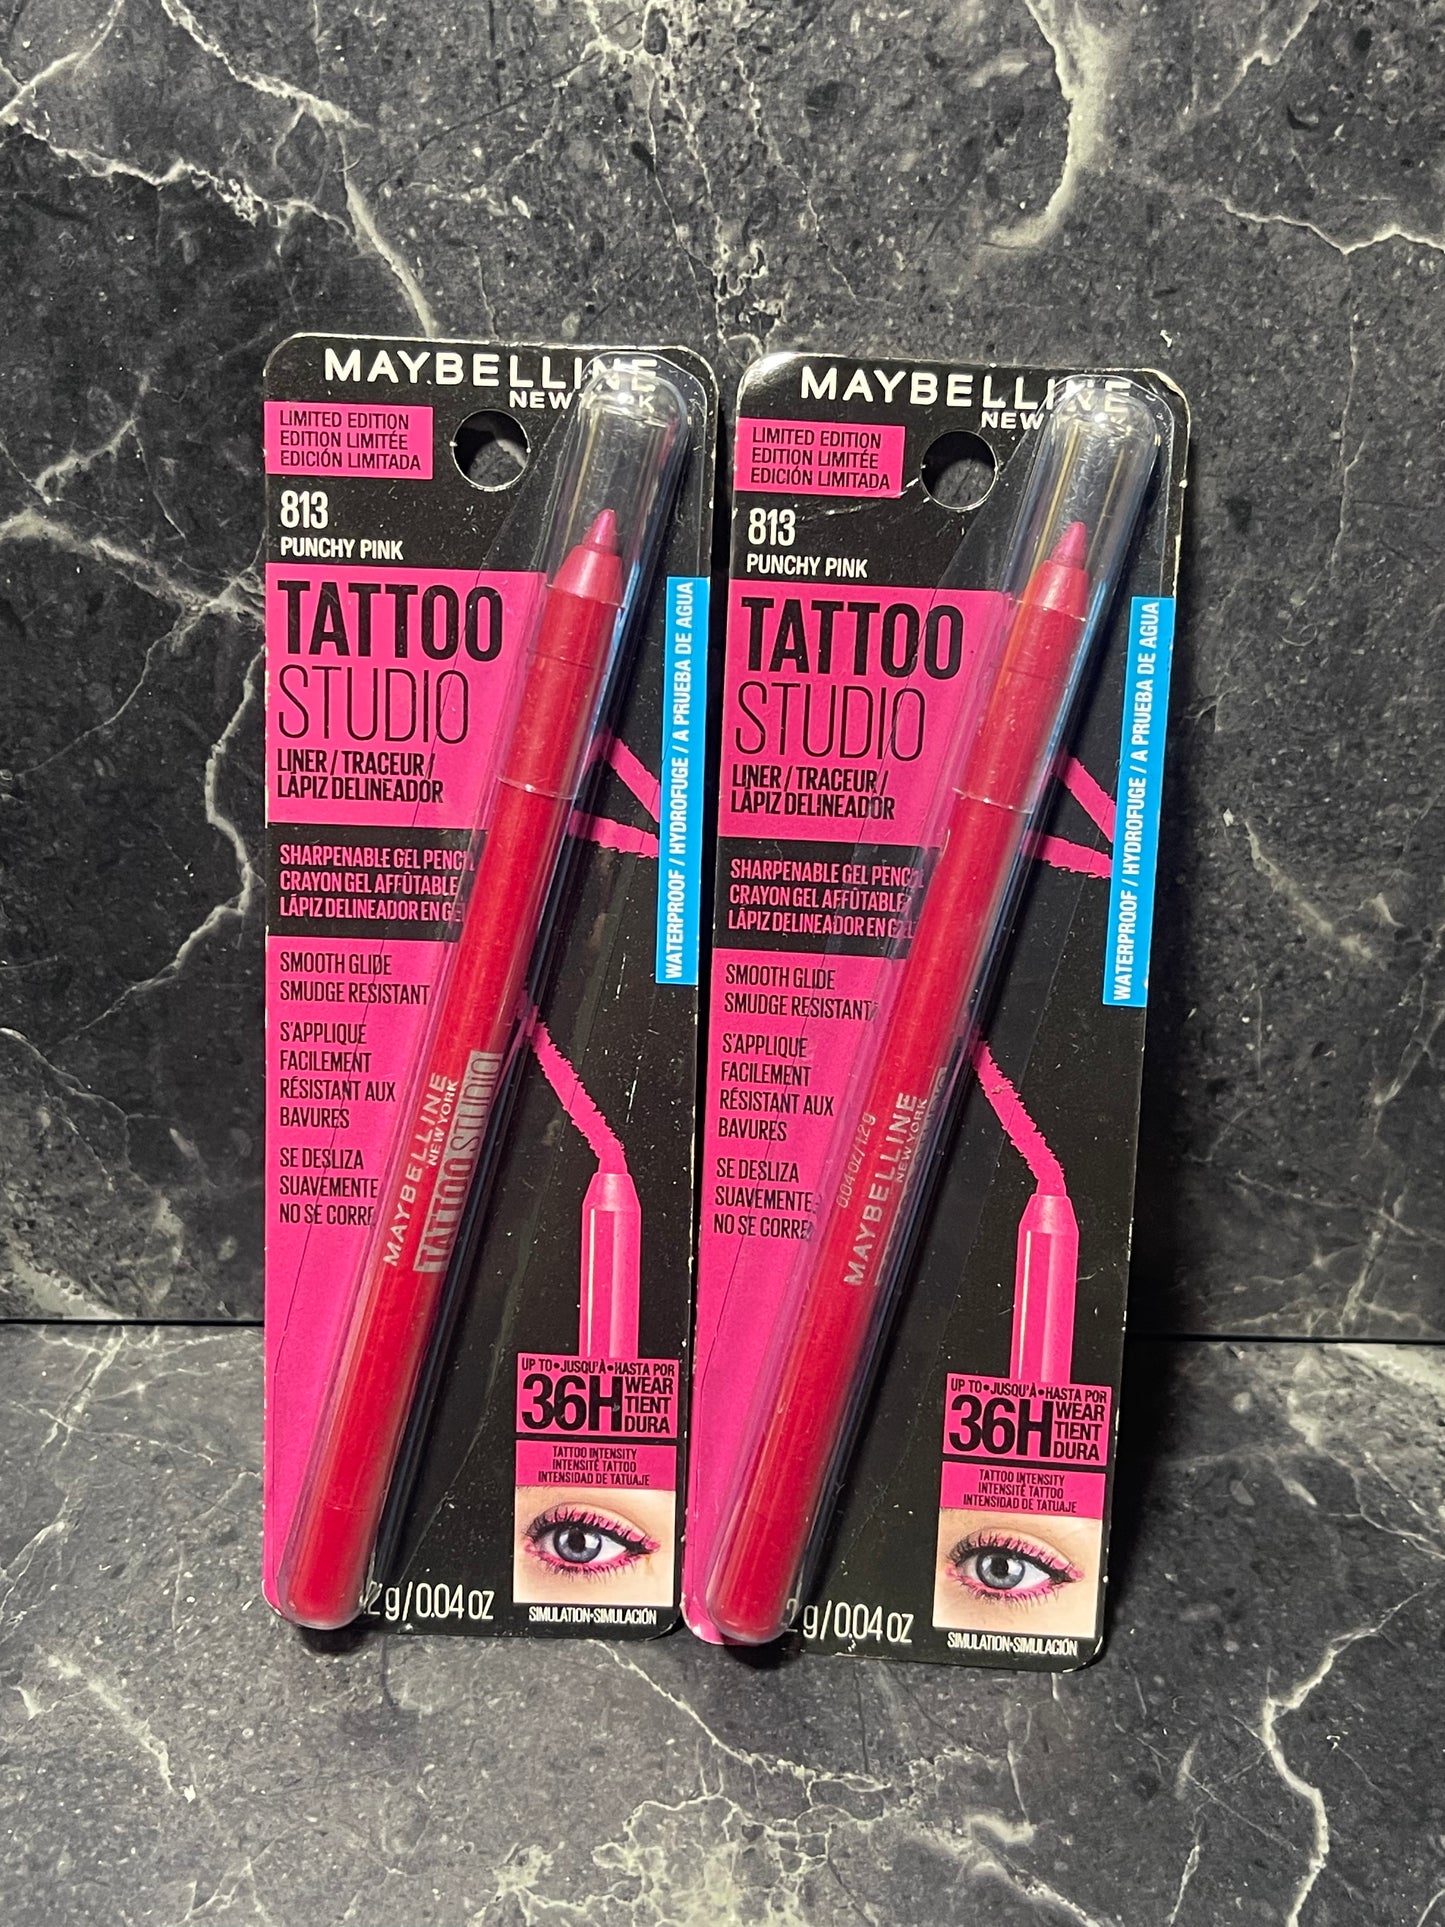 Maybelline Tattoo Studio Limited Edition Waterproof Liner #813 Punchy Pink 2 Pac